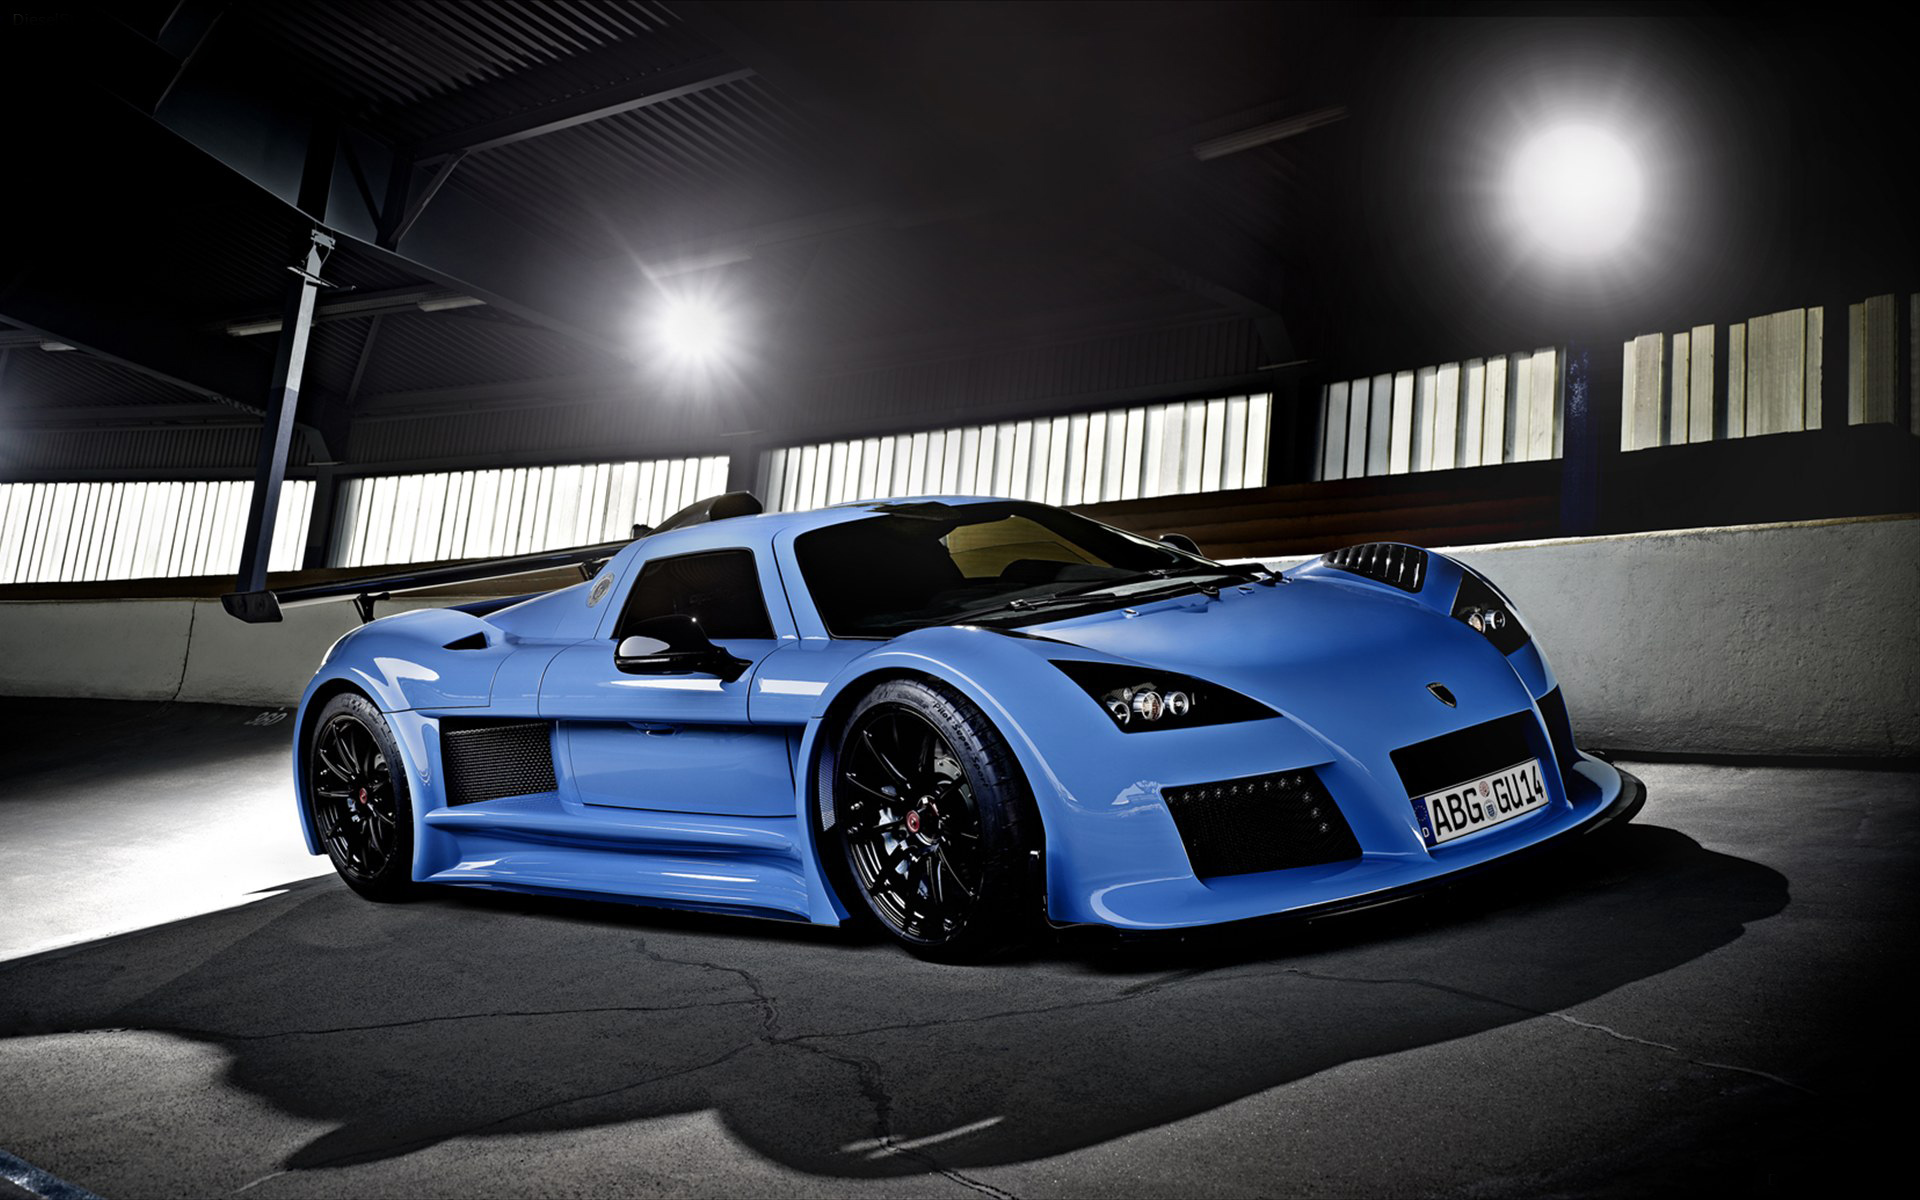 Front angled shot of a blue Gumpert Apollo at night time.